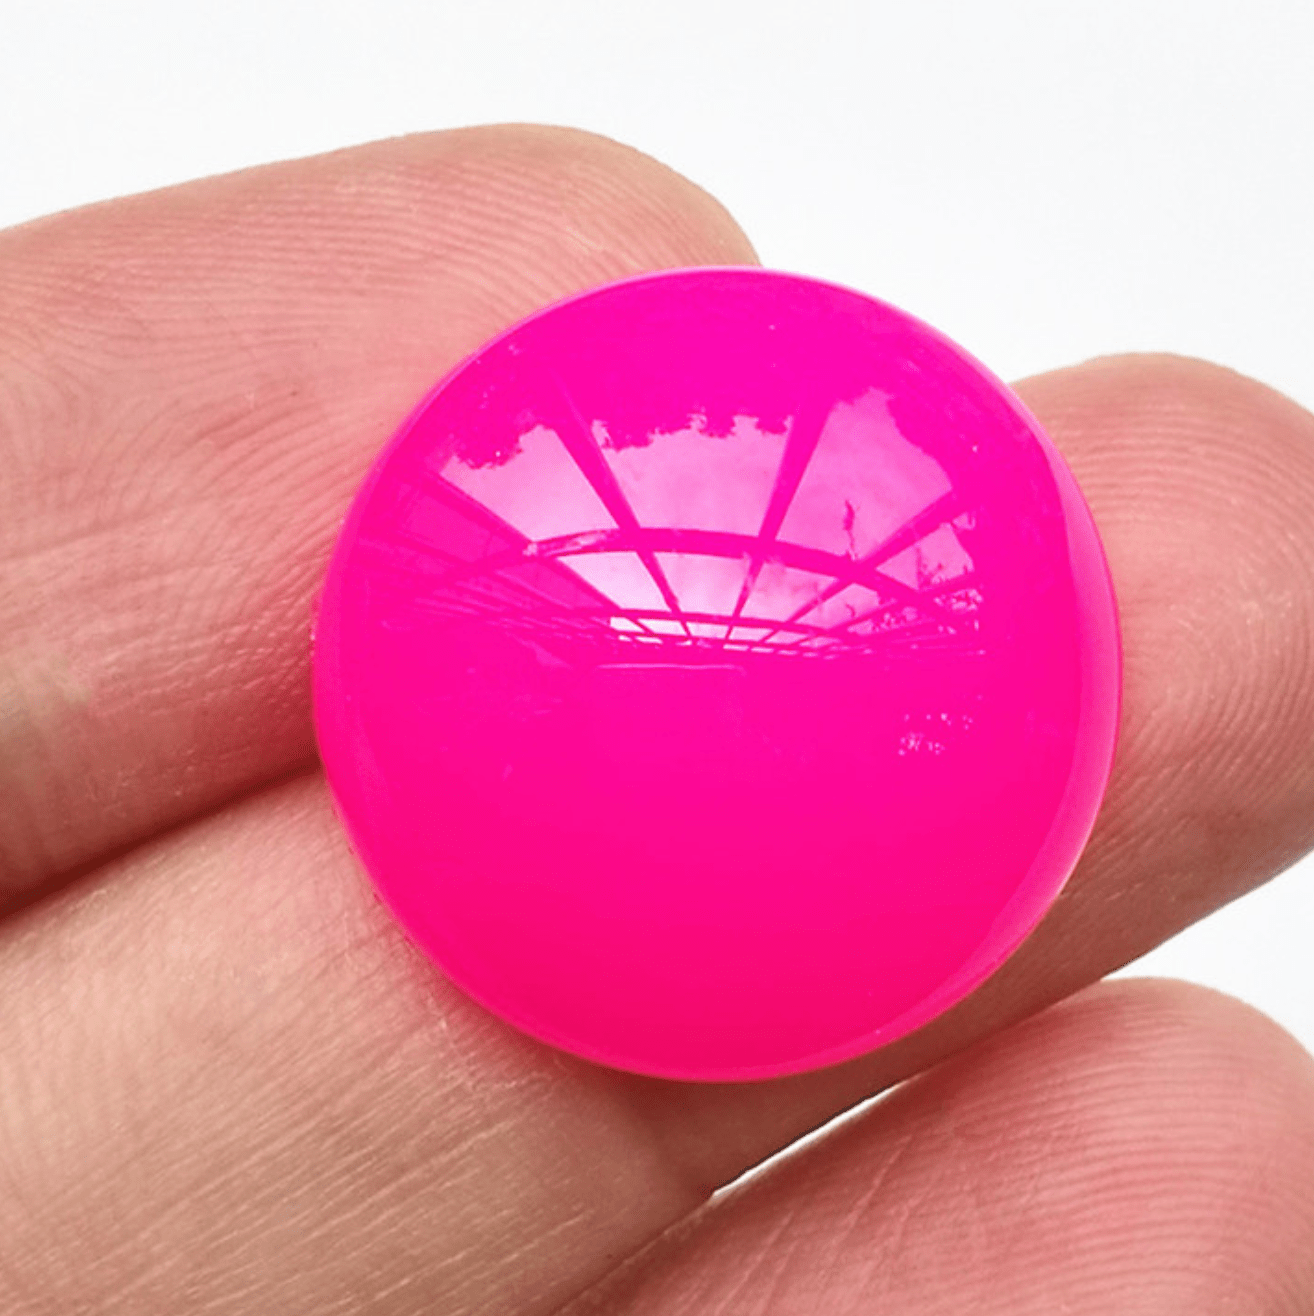 Sundaylace Creations & Bling Resin Gems 10mm Hot Pink Dome Stone Round, Glue on, Resin Gems